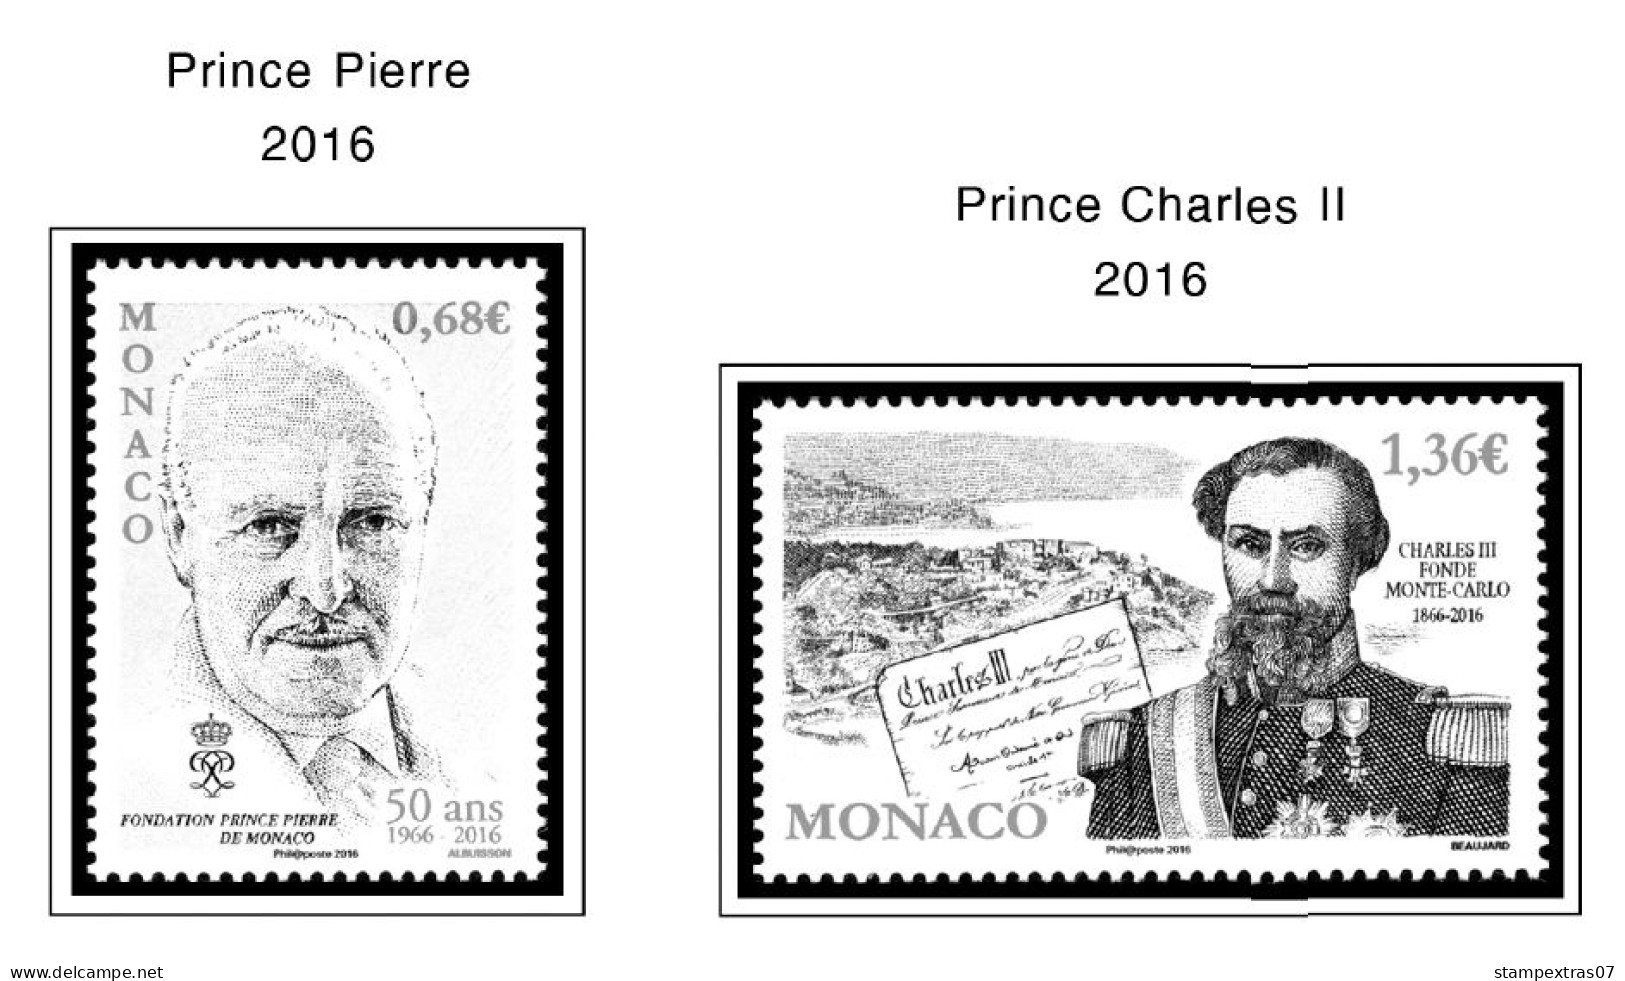 MONACO 1855-2010 + 2011-2020 STAMP ALBUM PAGES (409 b&w illustrated pages)